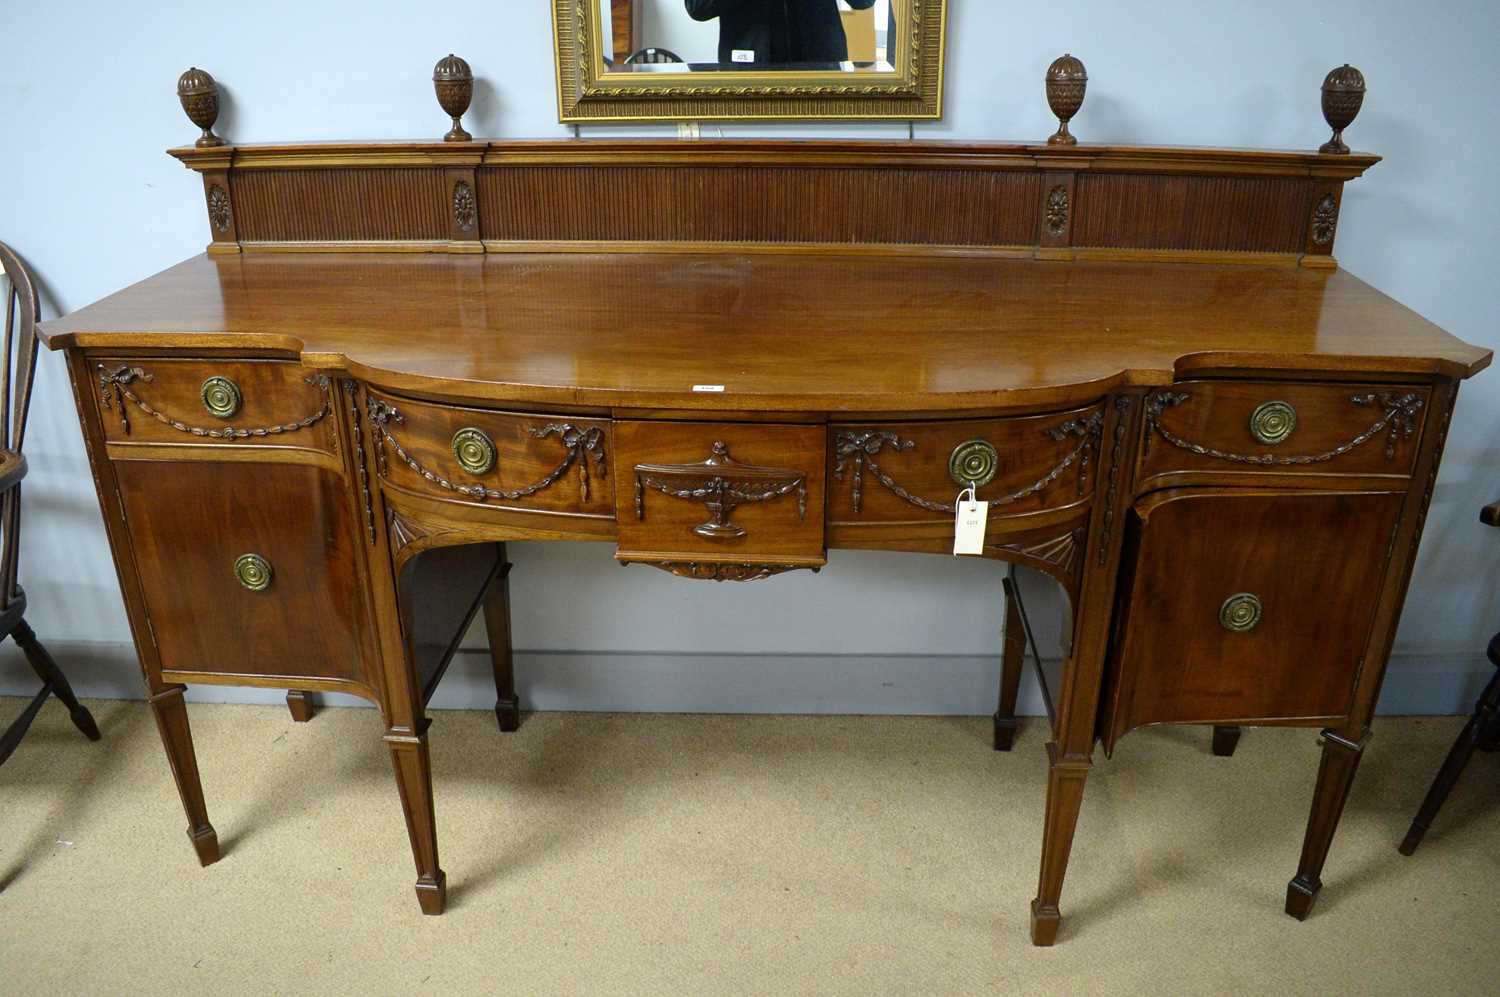 Lot 100 - Warings: an impressive fine quality Adam style mahogany bowfront sideboard.